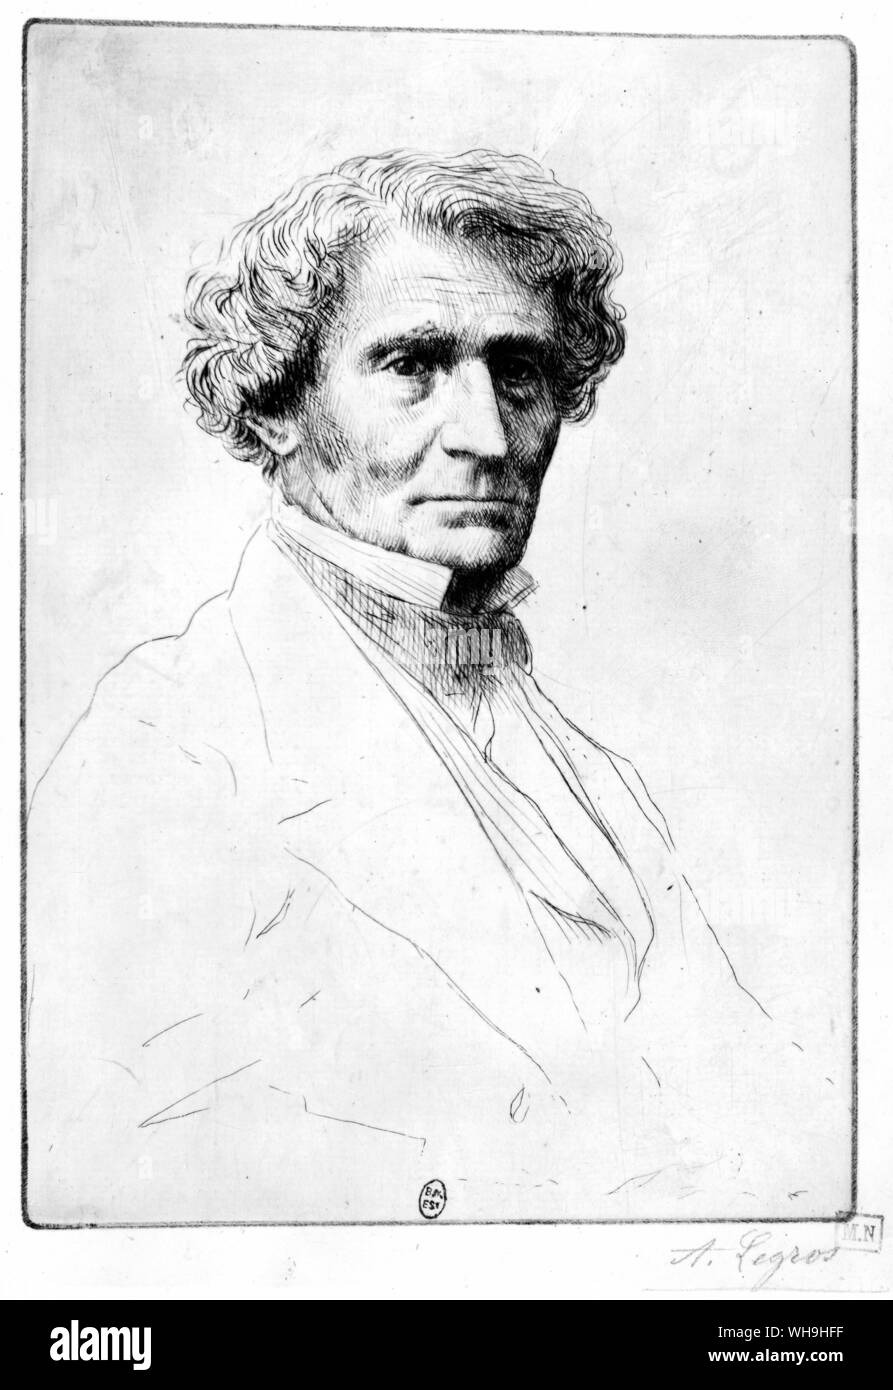 Drawing of Bertioz by A. Legros Stock Photo